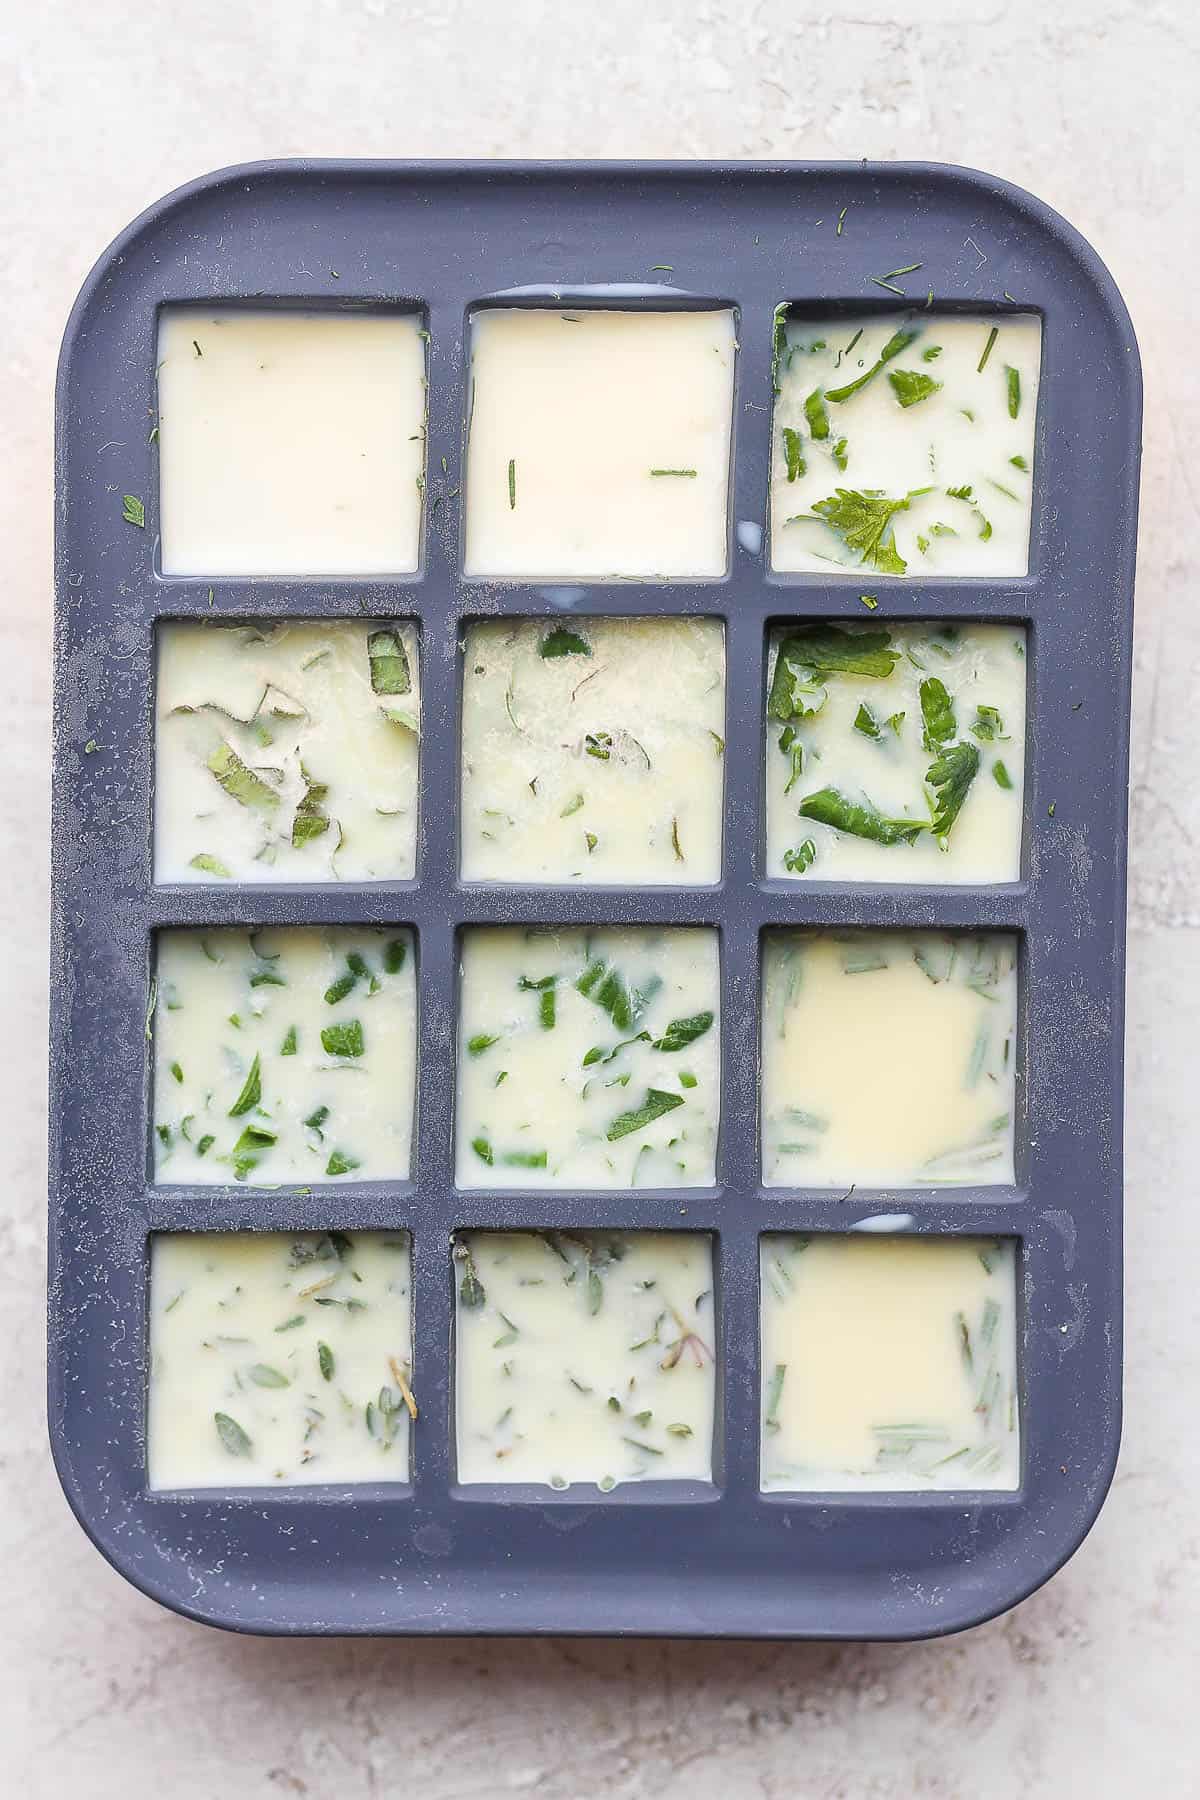 https://feelgoodfoodie.net/wp-content/uploads/2021/07/how-to-freeze-herbs-1-1.jpg